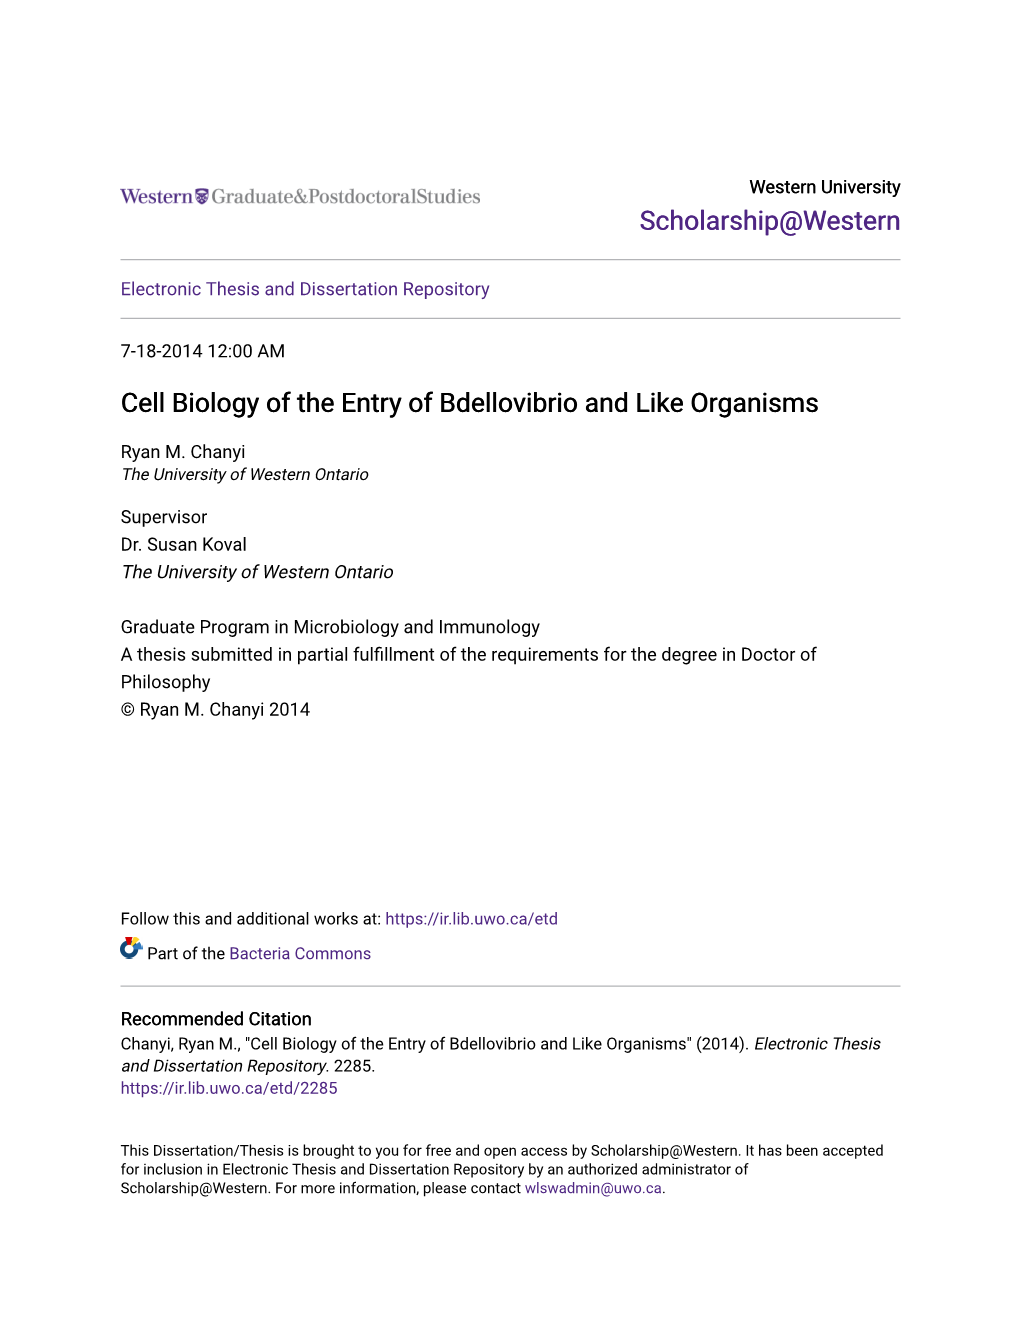 Cell Biology of the Entry of Bdellovibrio and Like Organisms